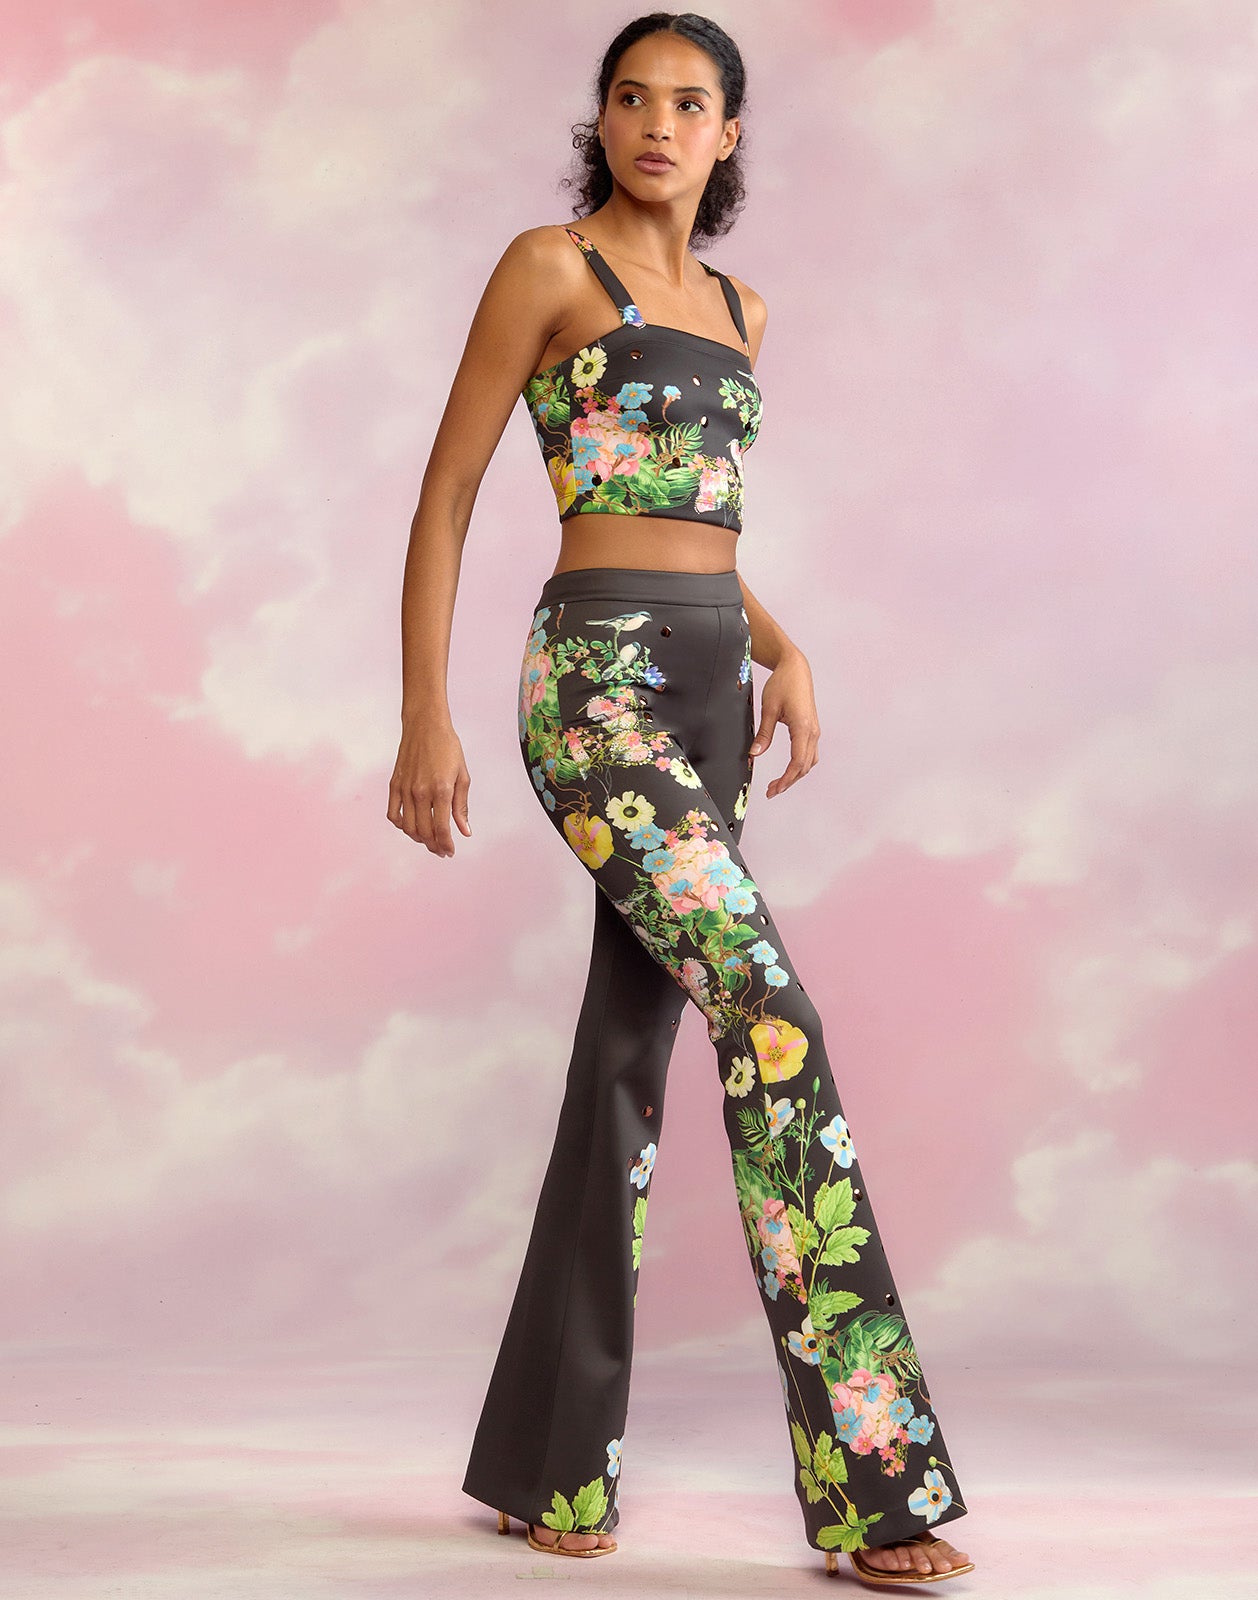 Bonded Fit and Flare Pants – Cynthia Rowley